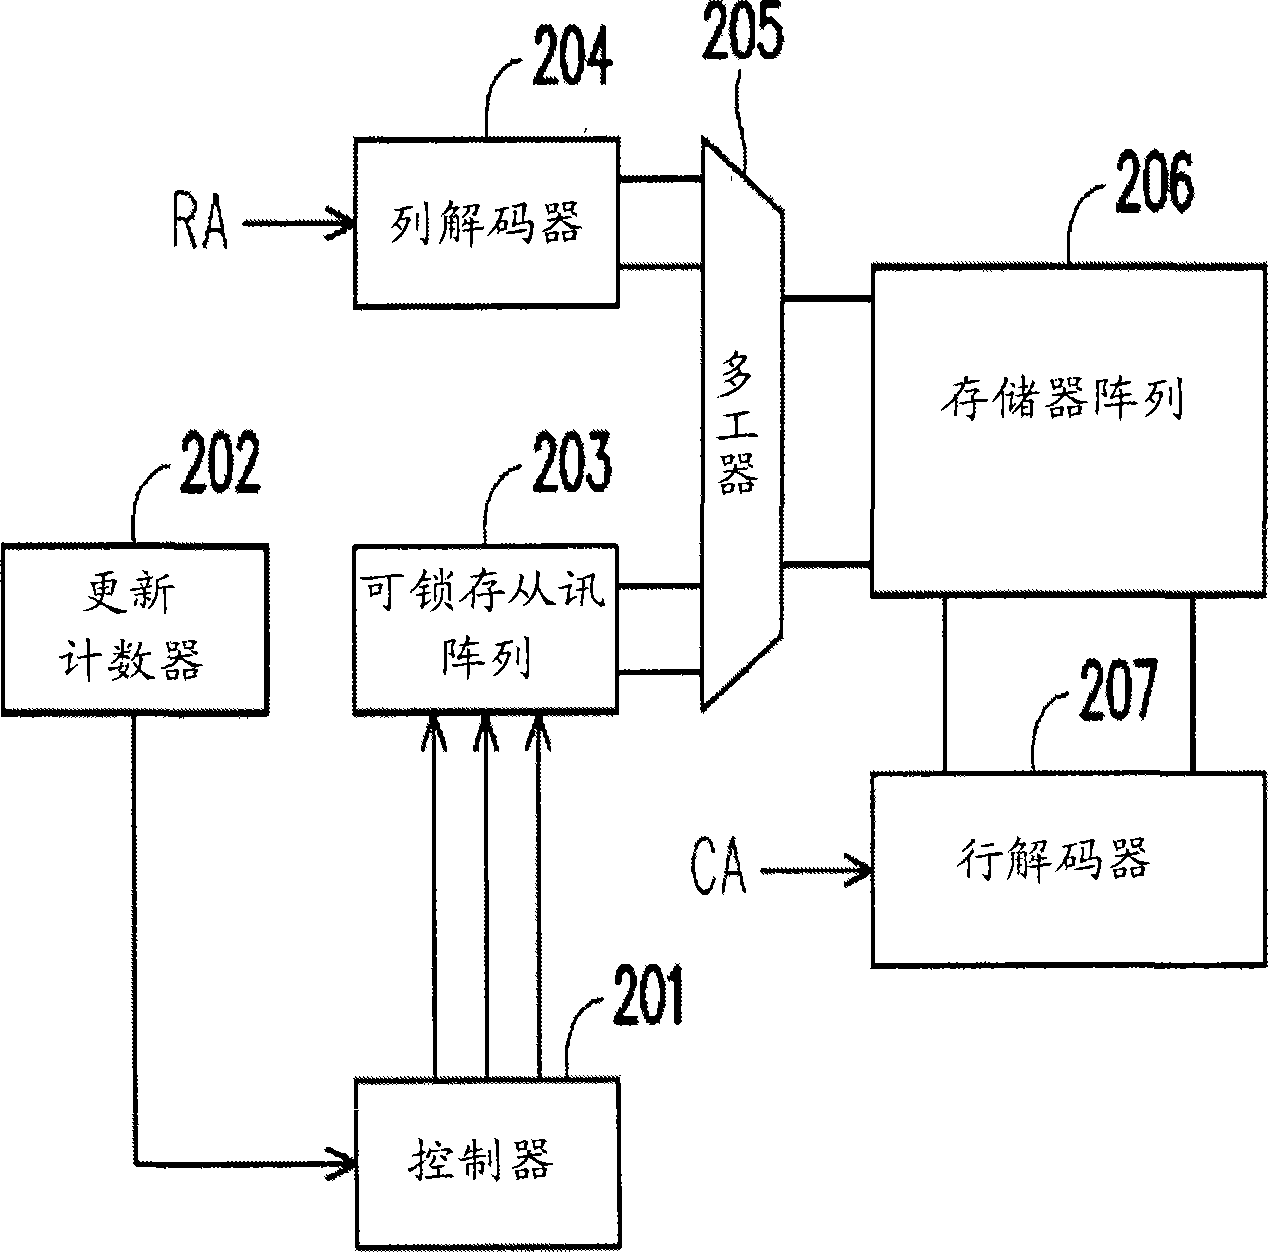 Memory device and its updating method